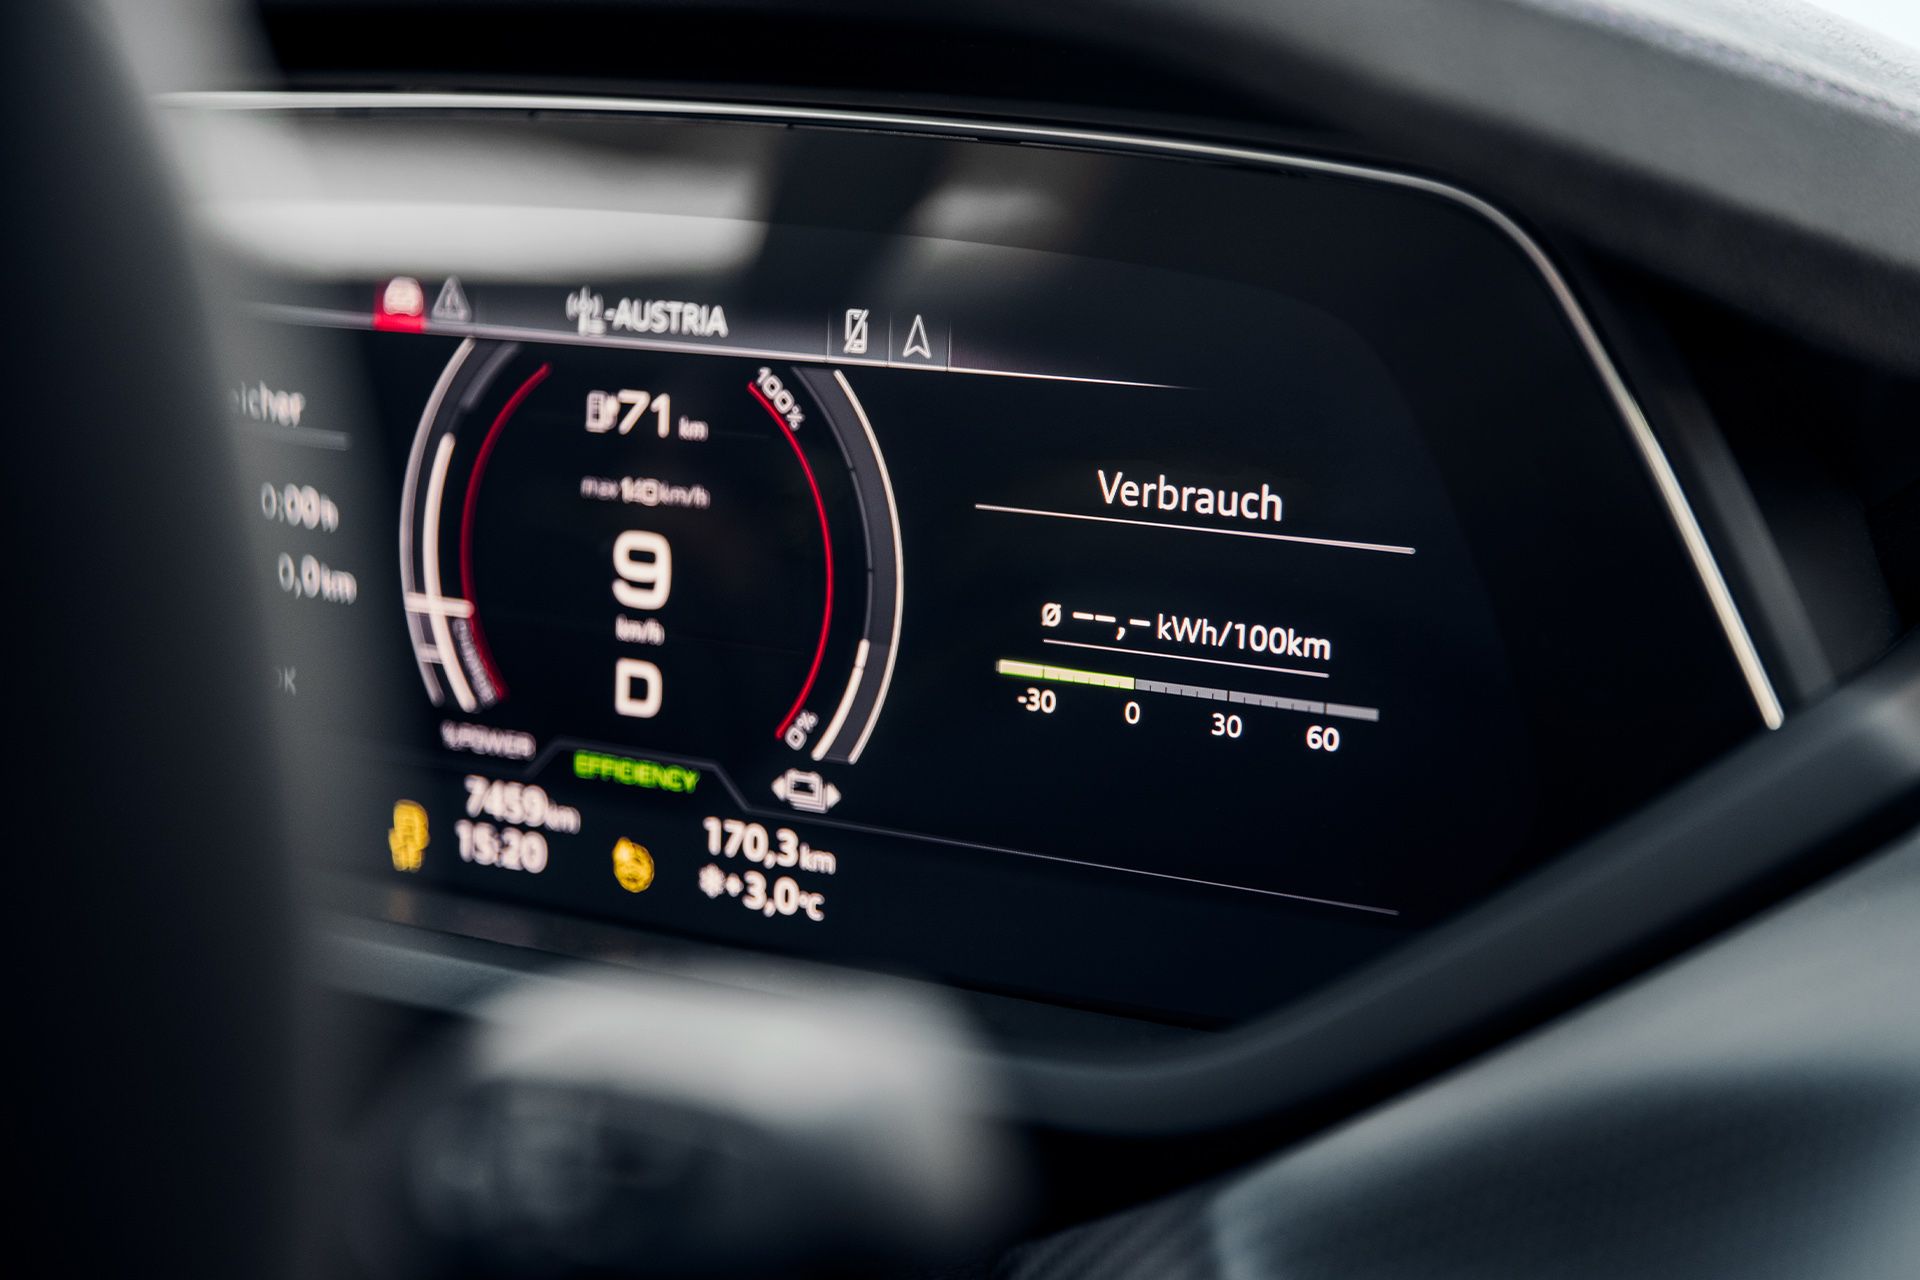 The cockpit display in the Audi RS e-tron GT.